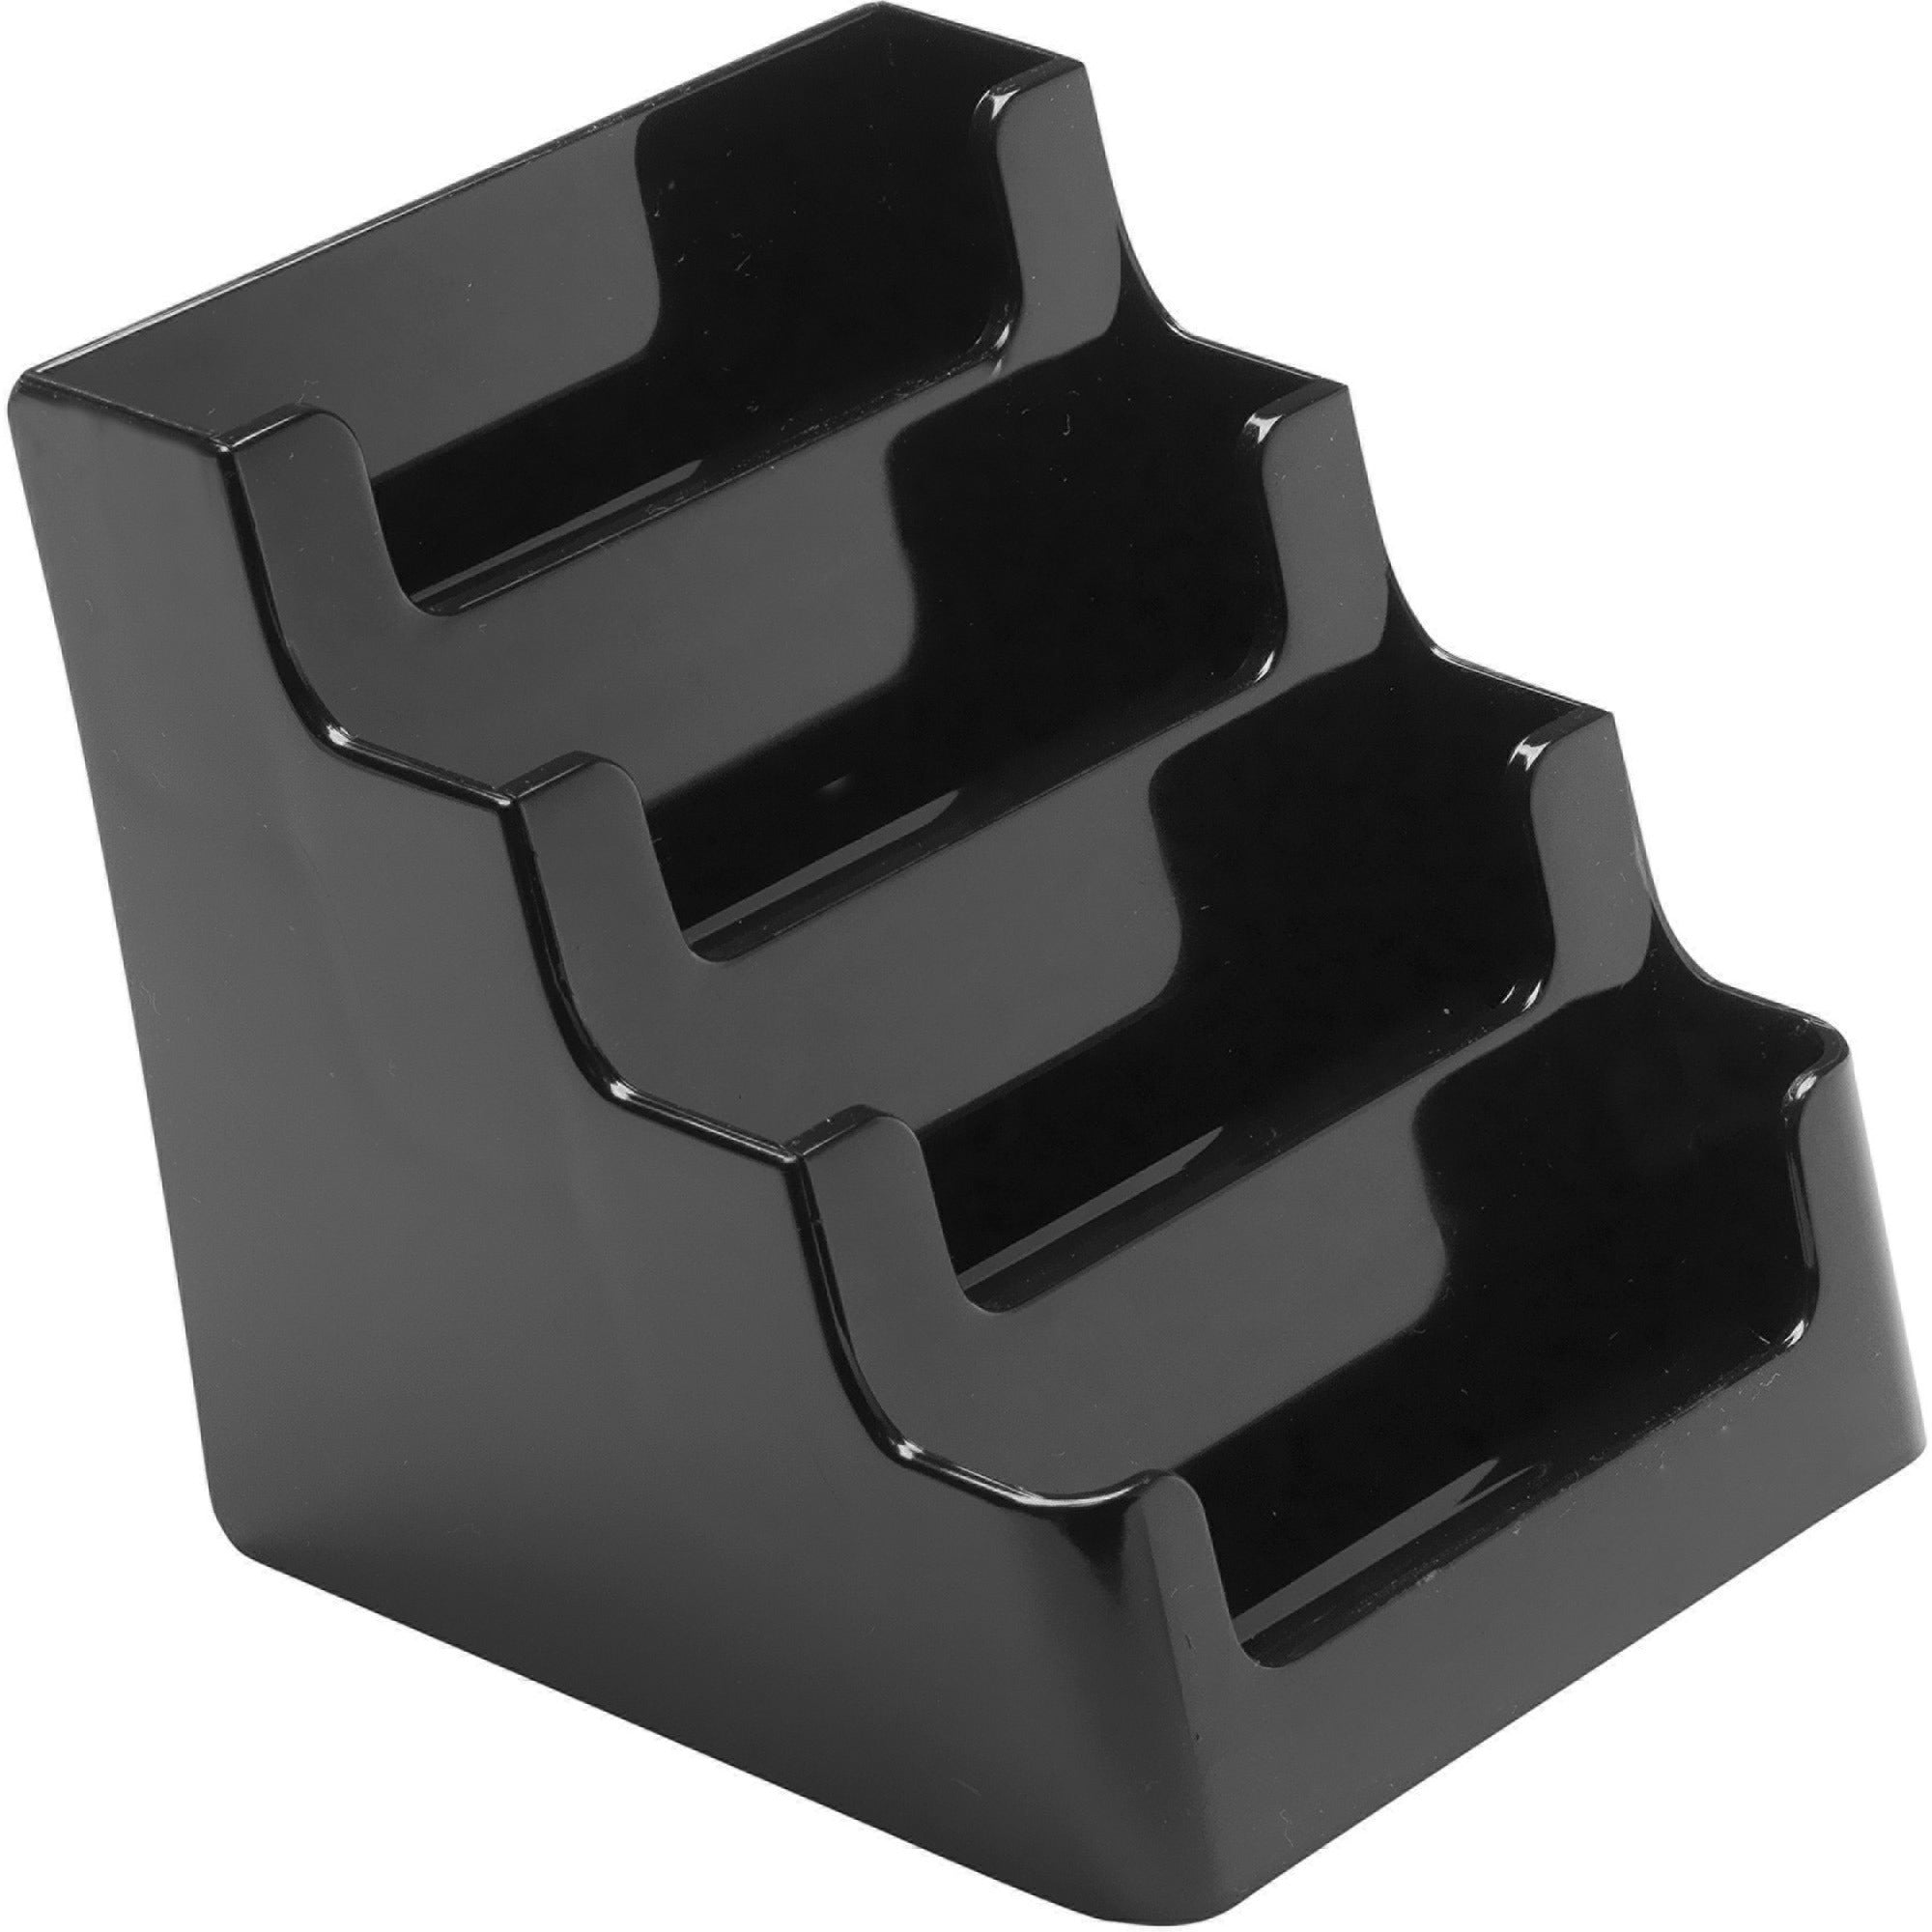 Deflecto 4 Tier Business Card Holder - 3.8" x 3.9" x 3.5" x - Plastic - 1 Each - Black - Storage Compartment, Durable, Recyclable - 